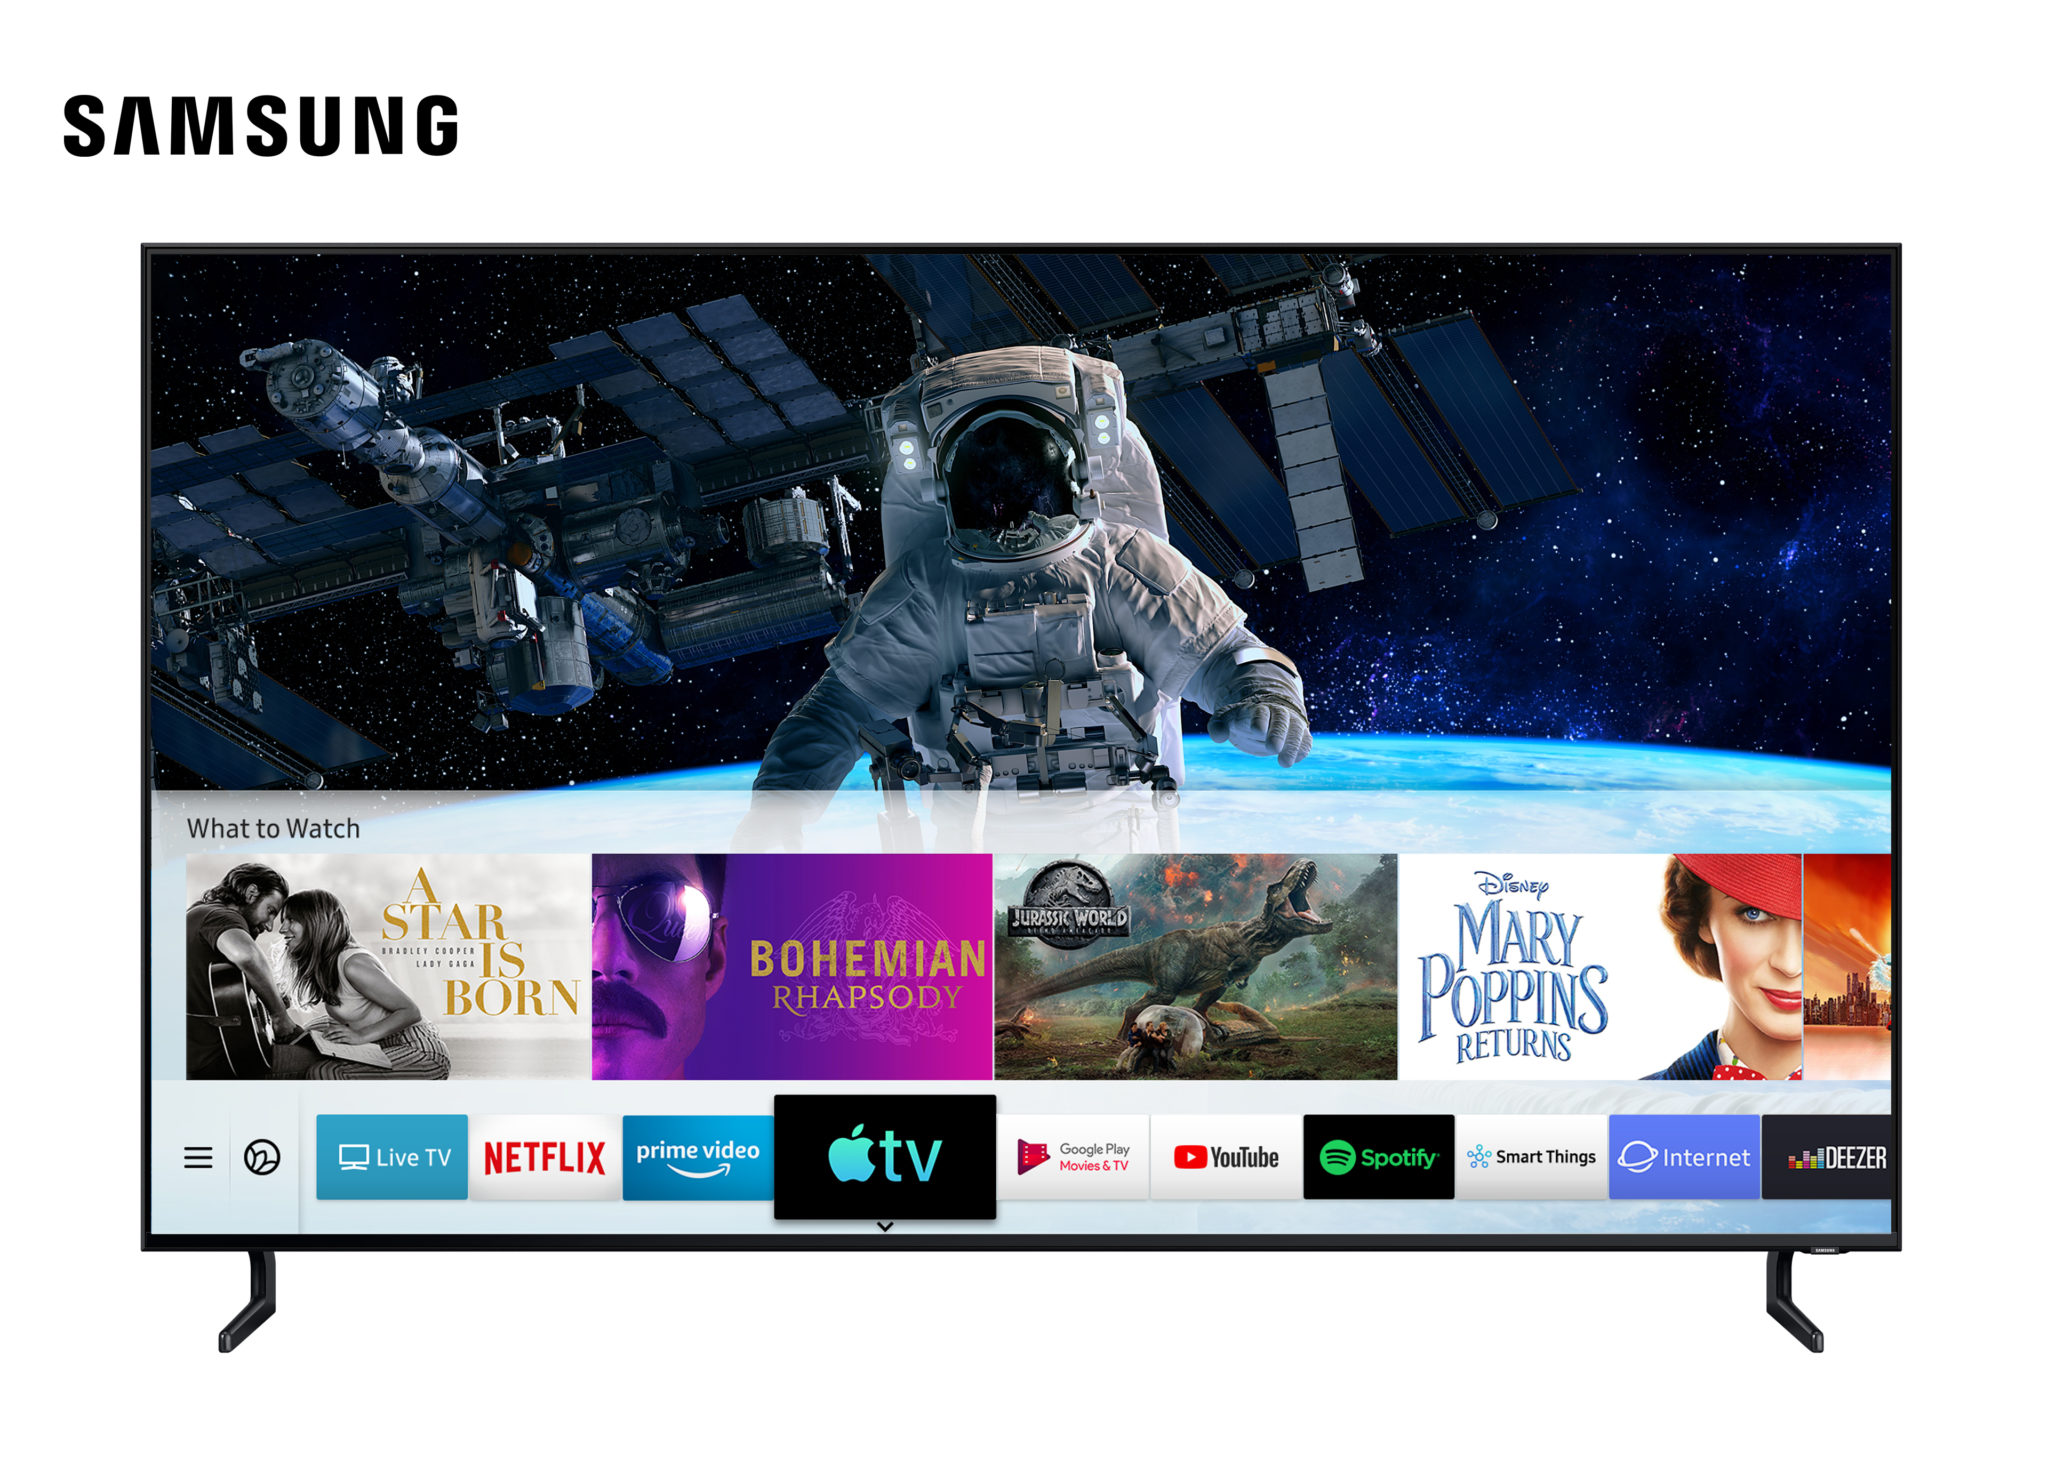 The New Apple TV App & AirPlay 2 Are Coming to Samsung Smart TVs Today